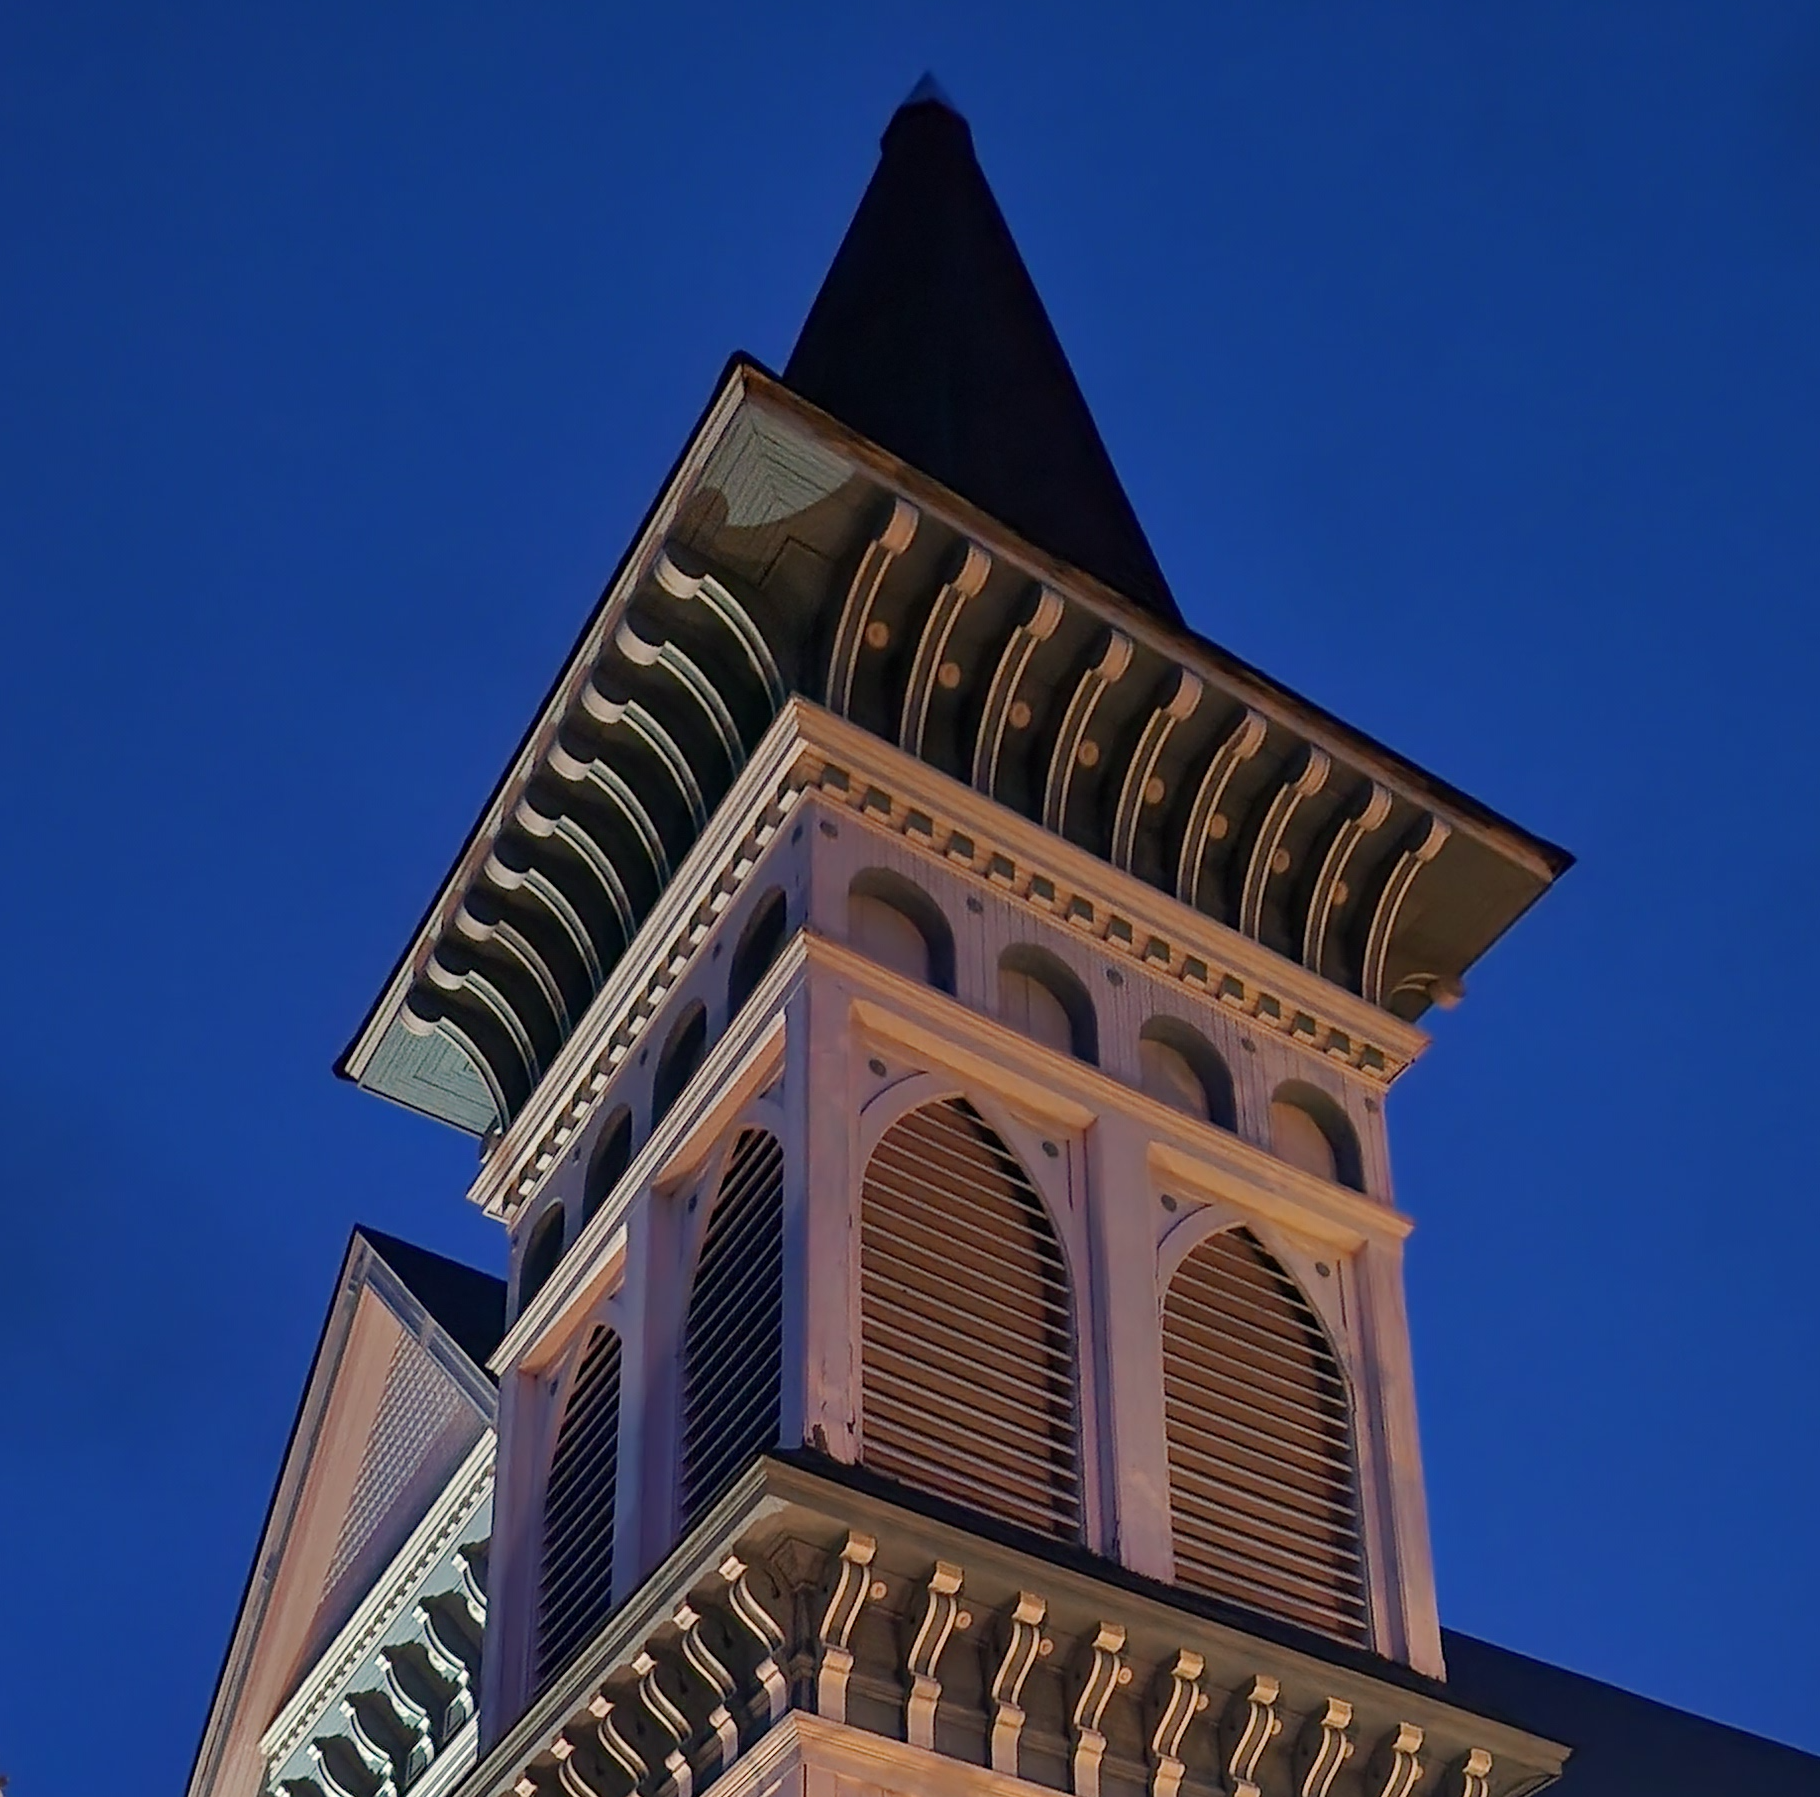 An ornamented wooden church steeple with nighttime skies around it.